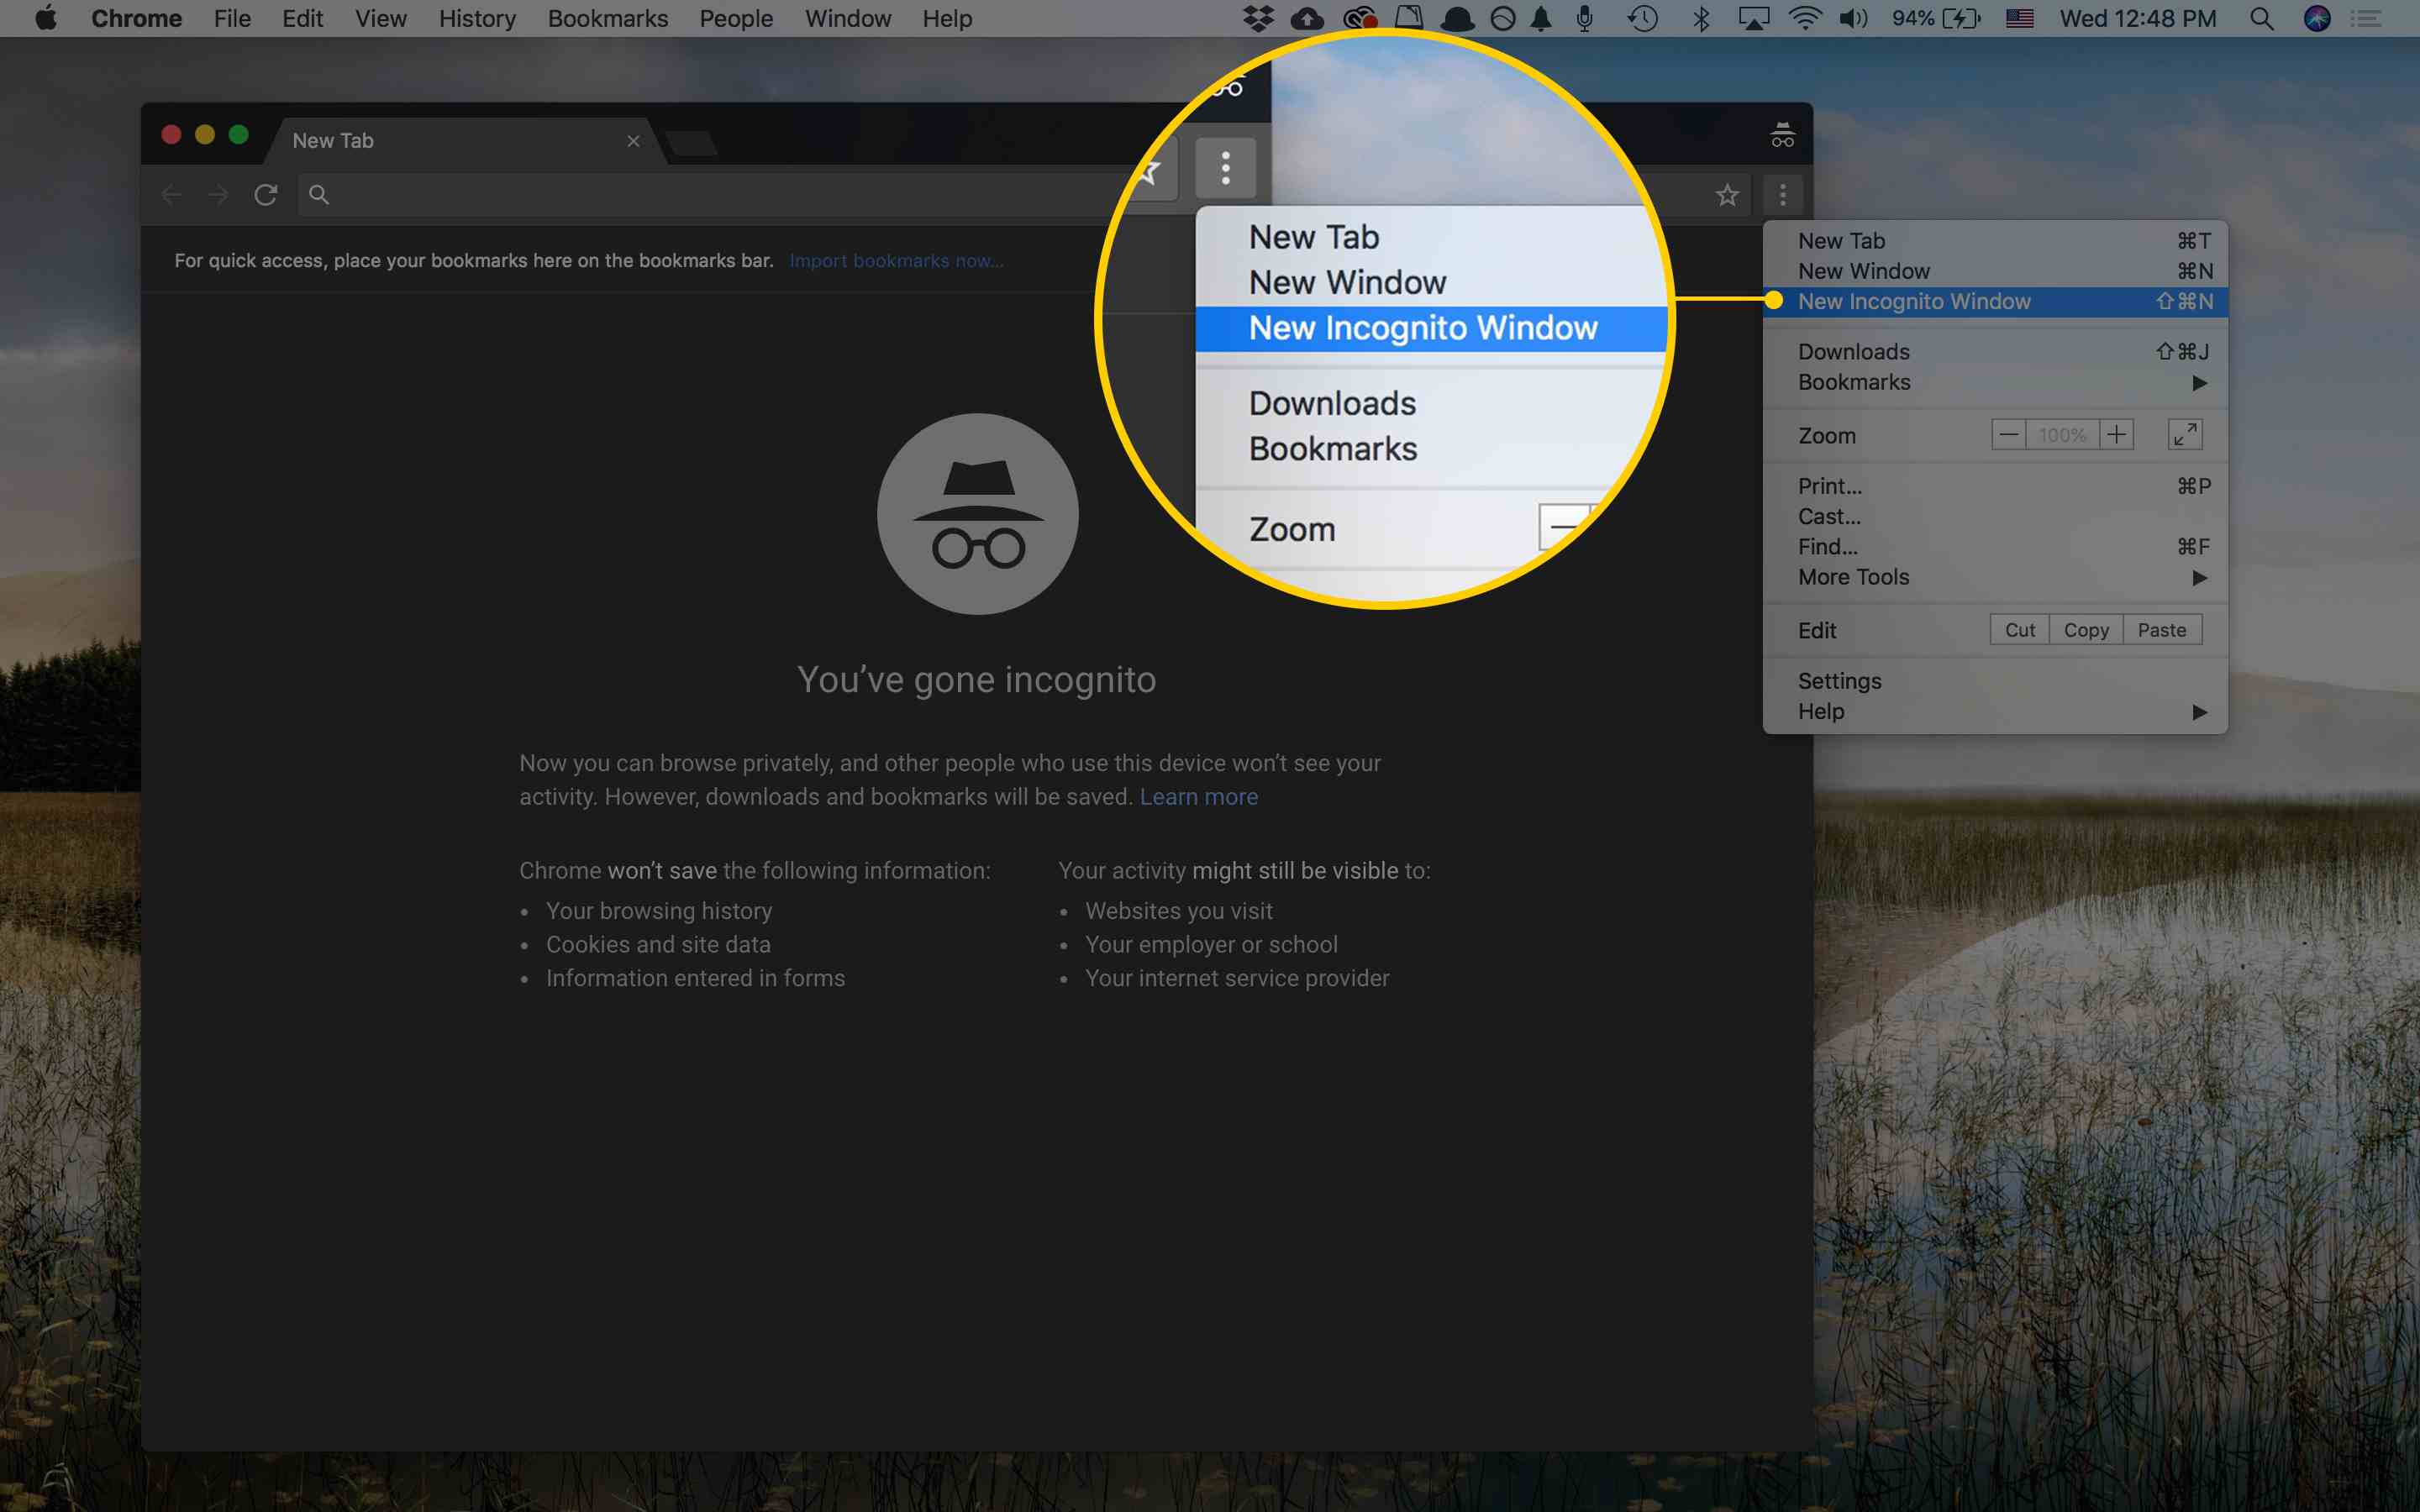 extensions for incognito mac chrome